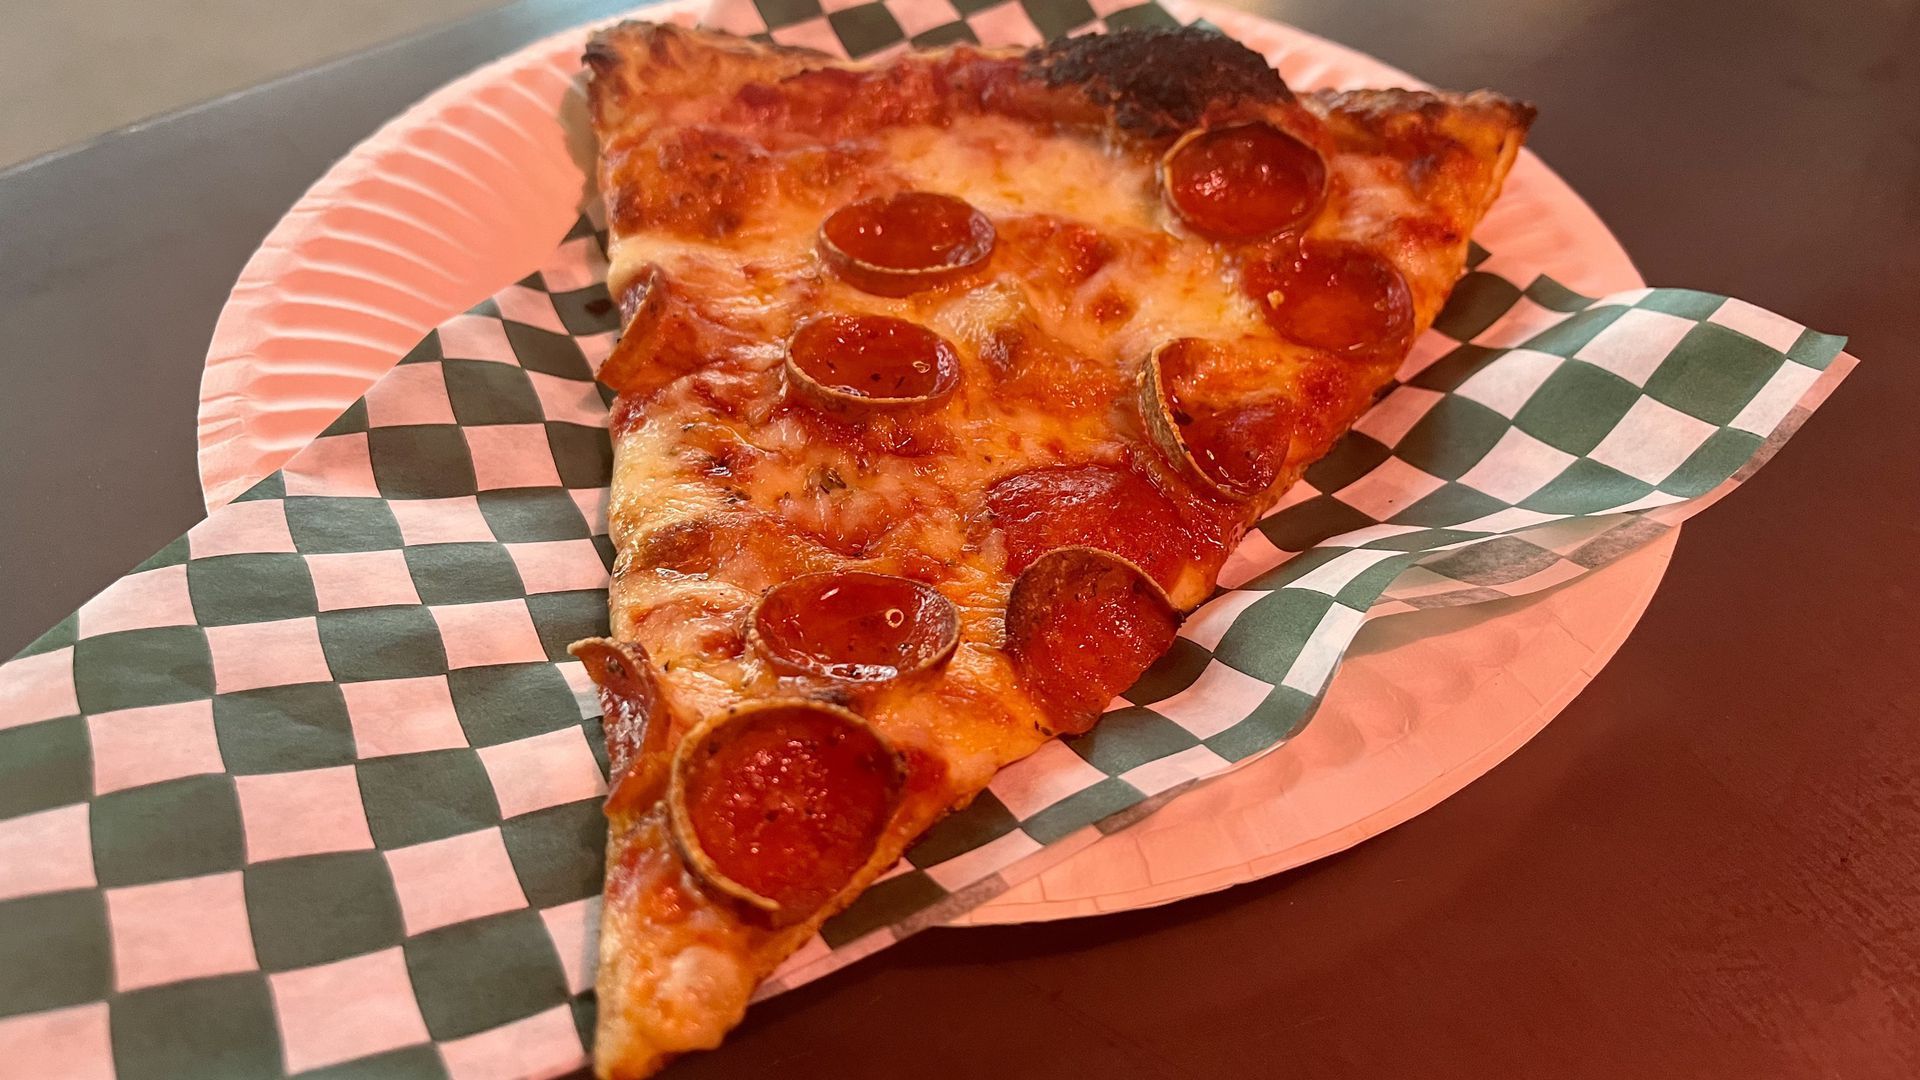 A pepperoni slice of pizza.